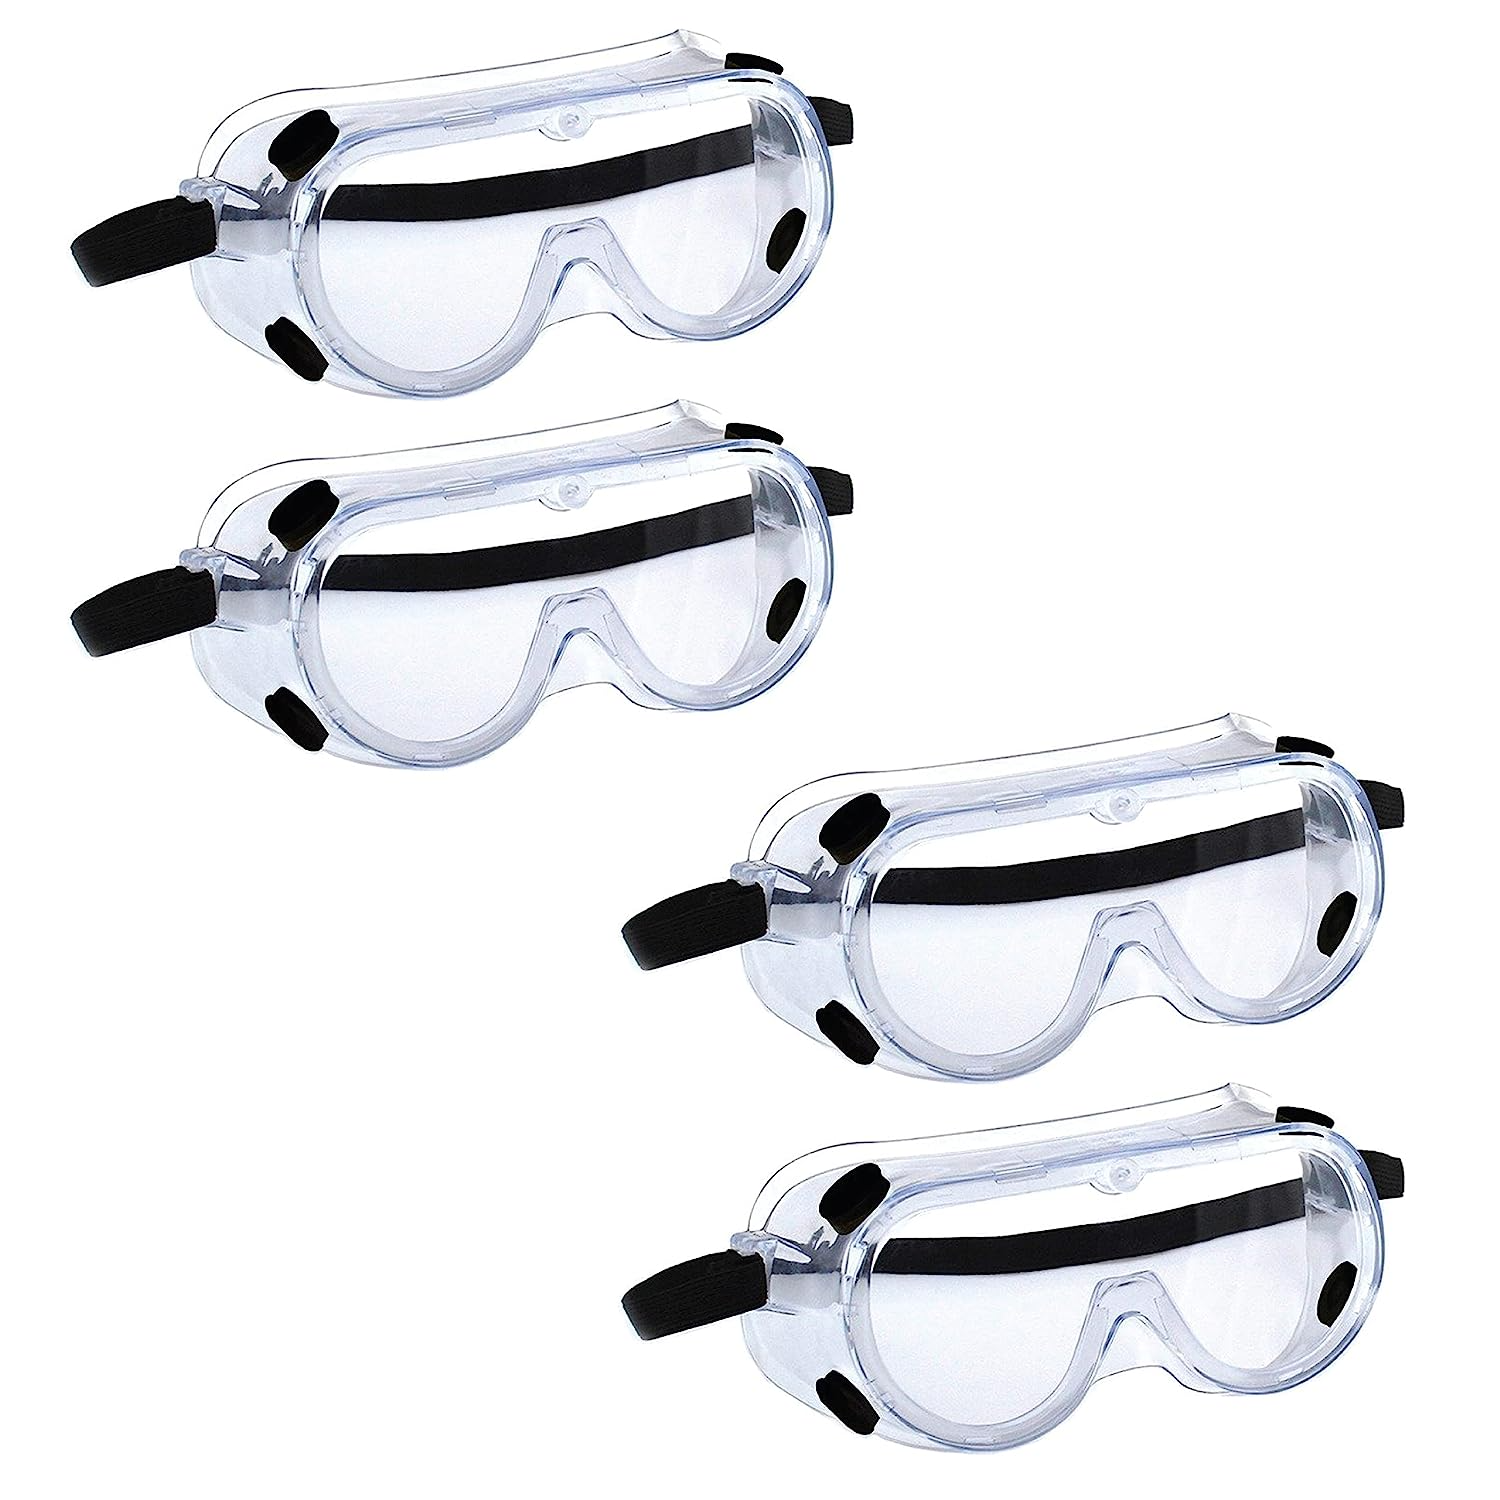 robustt-safety-goggles-for-chemical-protection-with-an-adjustable-strap-and-minimum-lens-fogging-pack-of-4